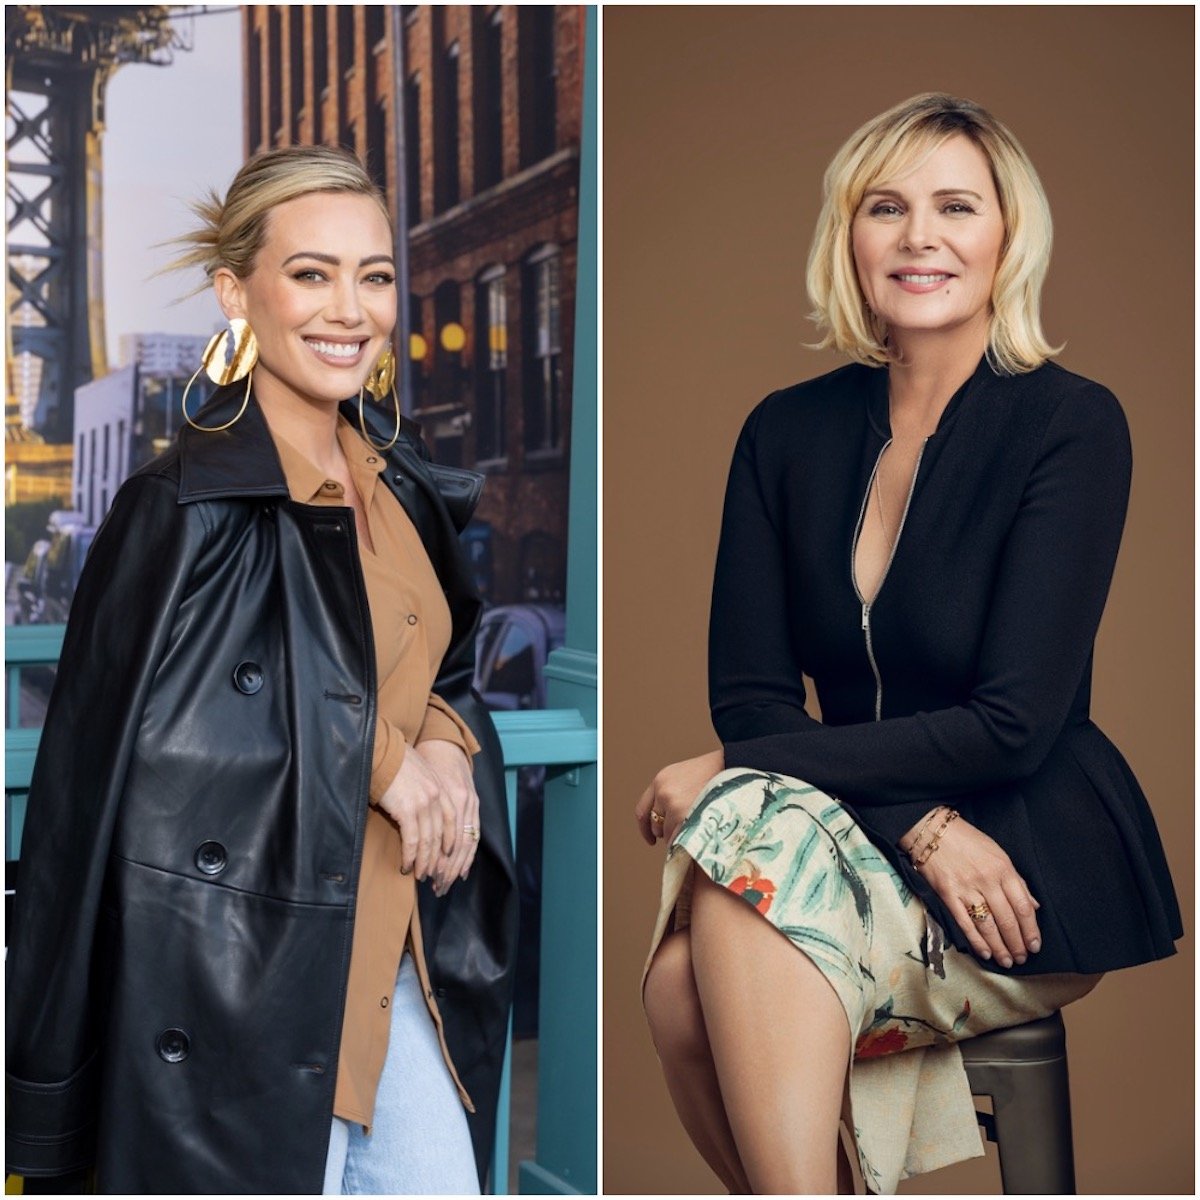 Hilary Duff or Kim Cattrall: Which How I Met Your Father Star Has the Higher Net Worth?